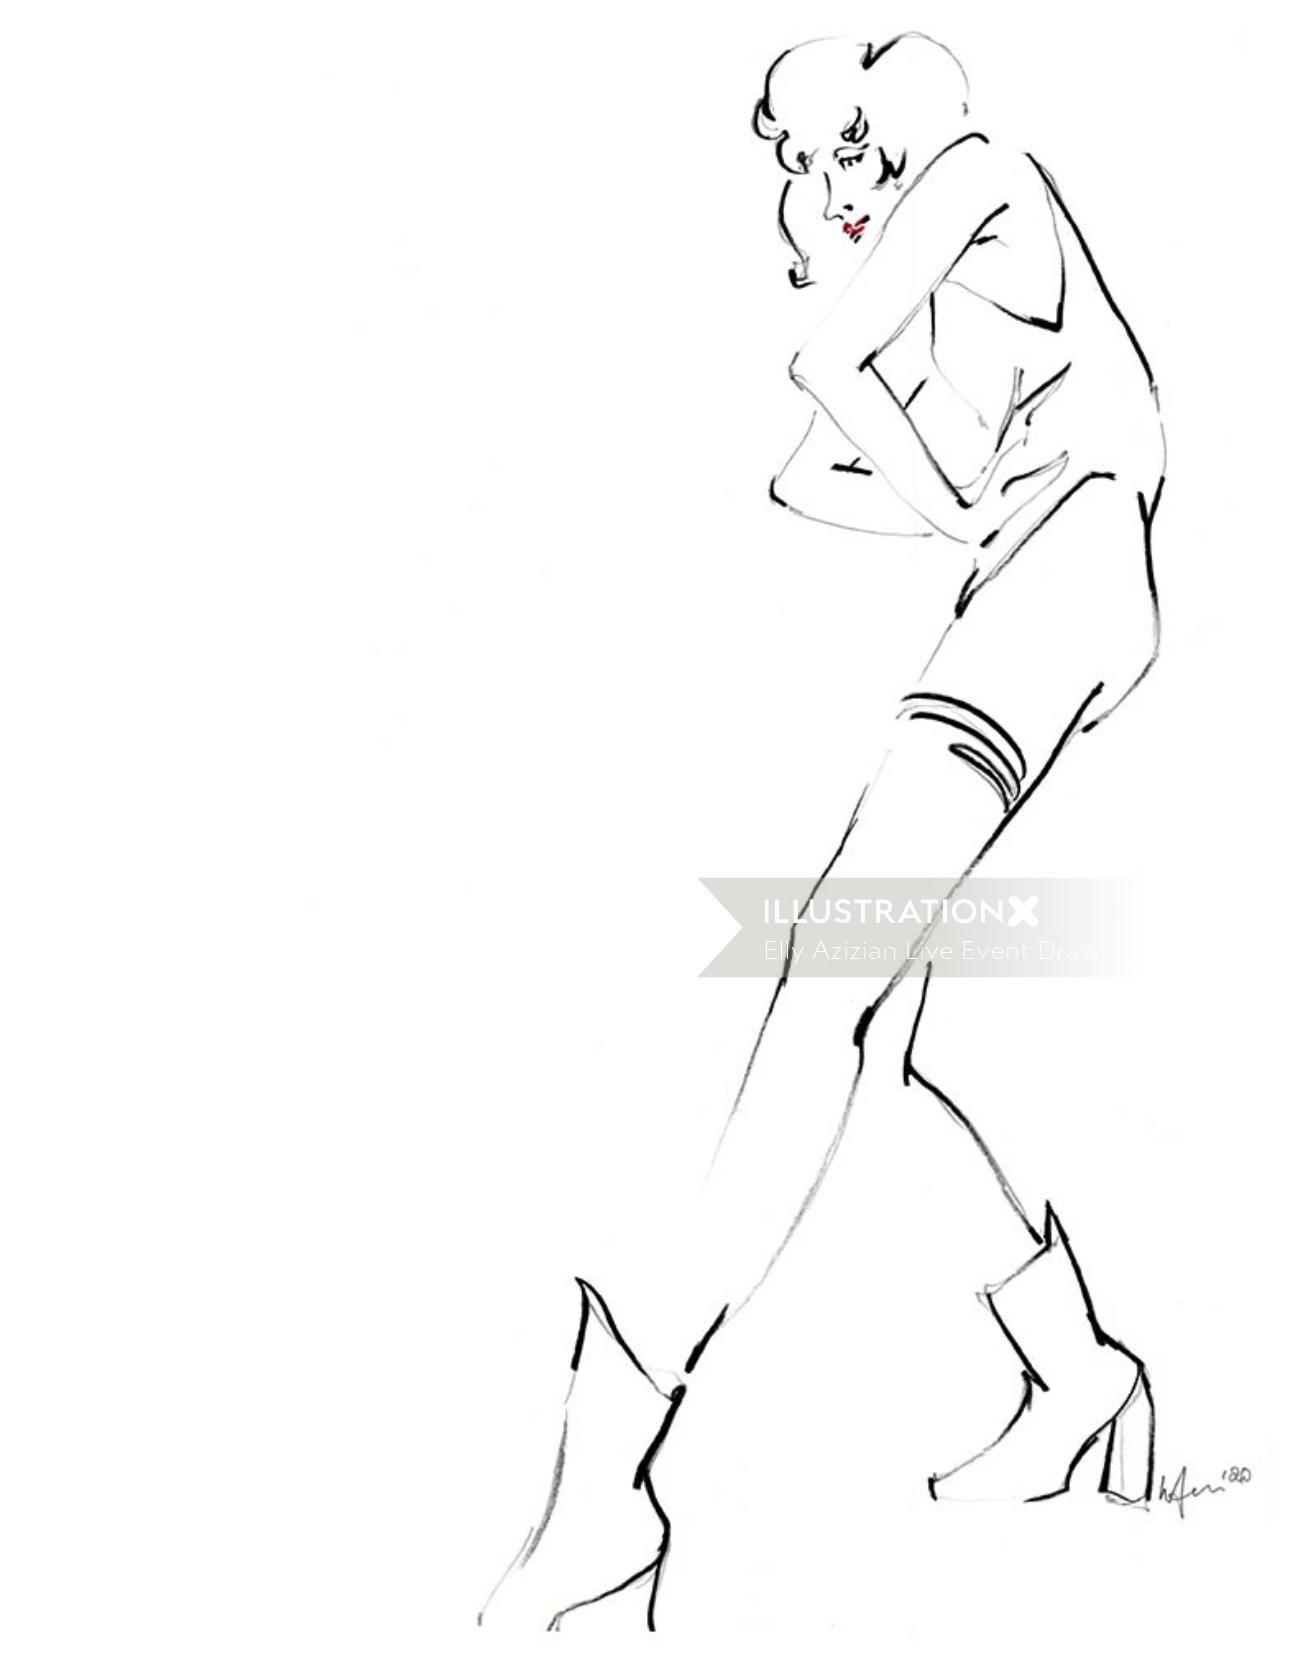 Live Drawing of Standing Model
